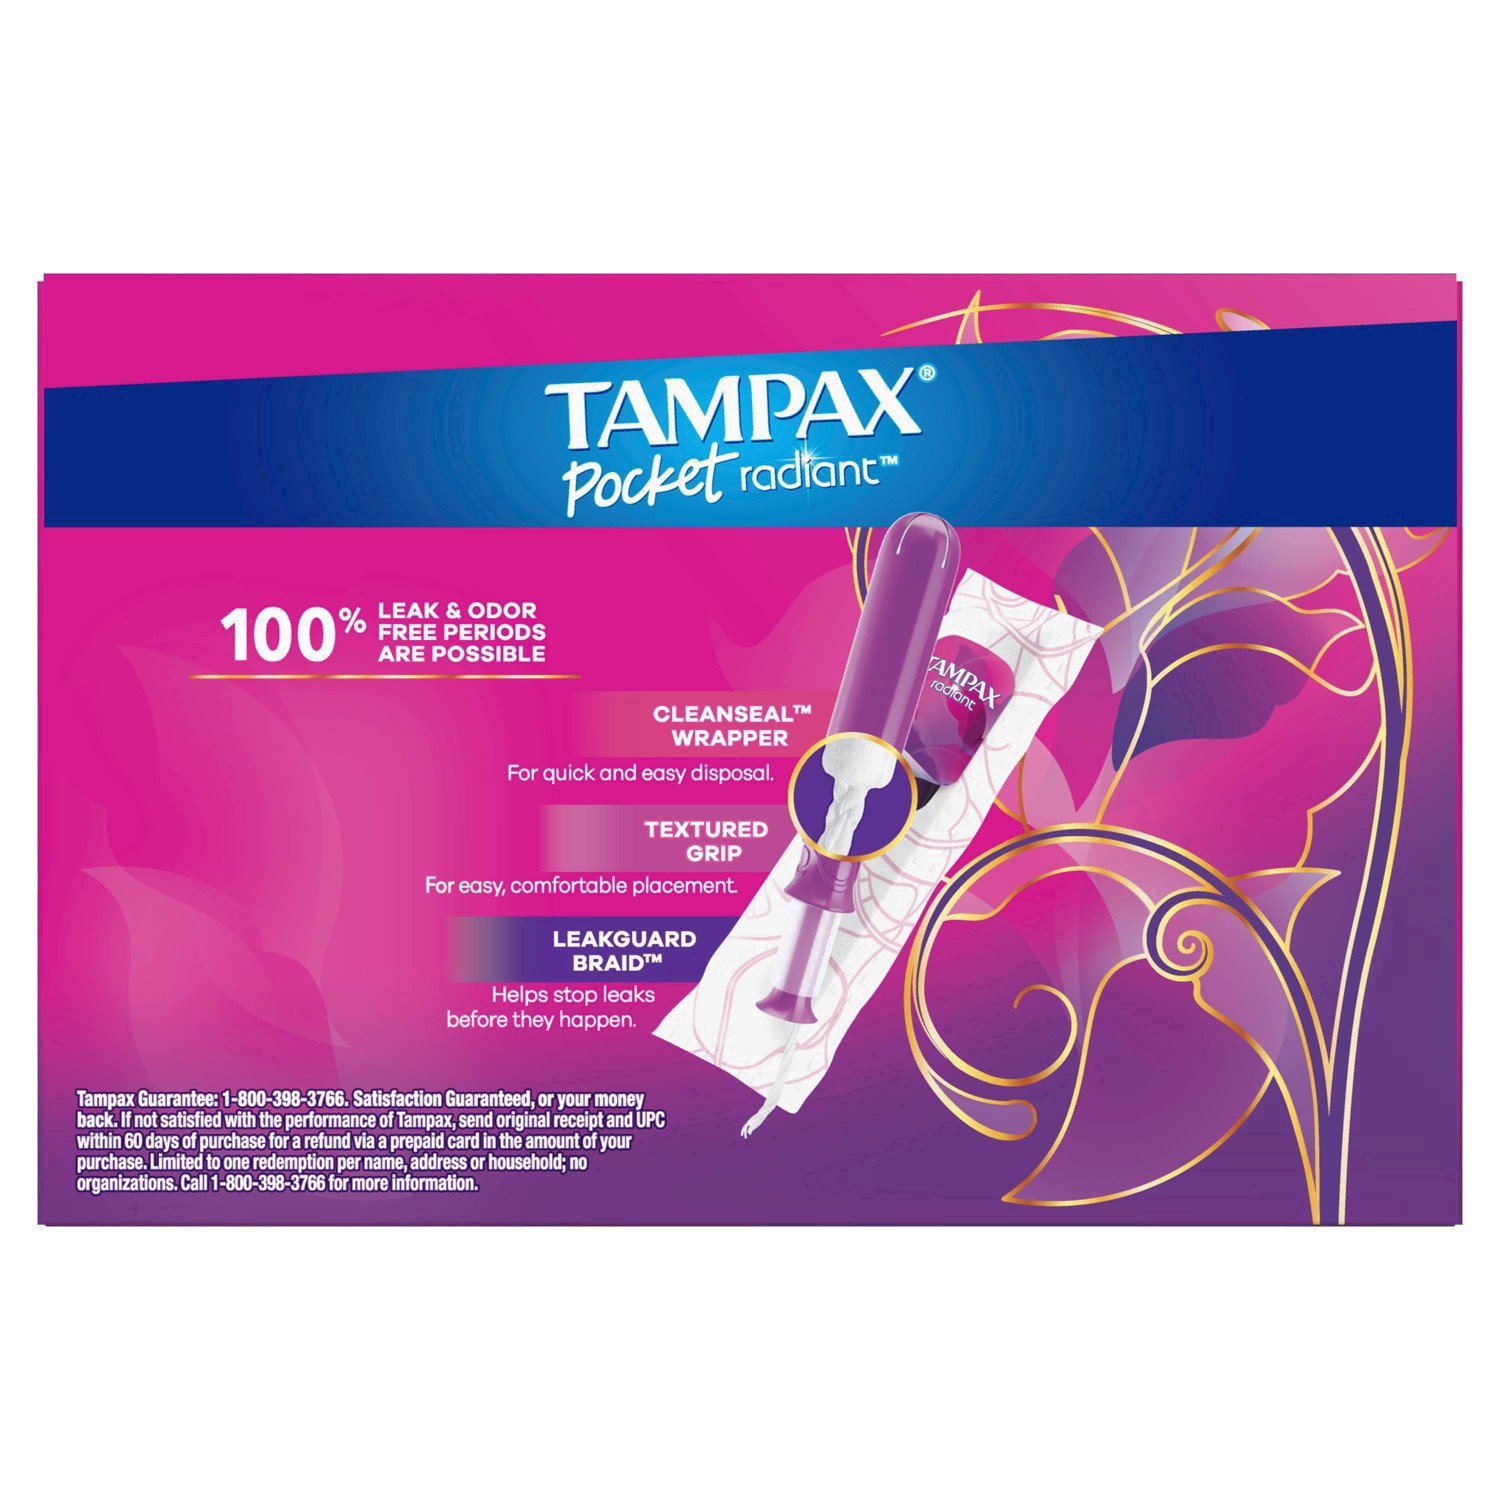 slide 65 of 94, Tampax Pocket Radiant Compact Plastic Tampons, With LeakGuard Braid, Super Absorbency, Unscented, 28 Count, 28 ct